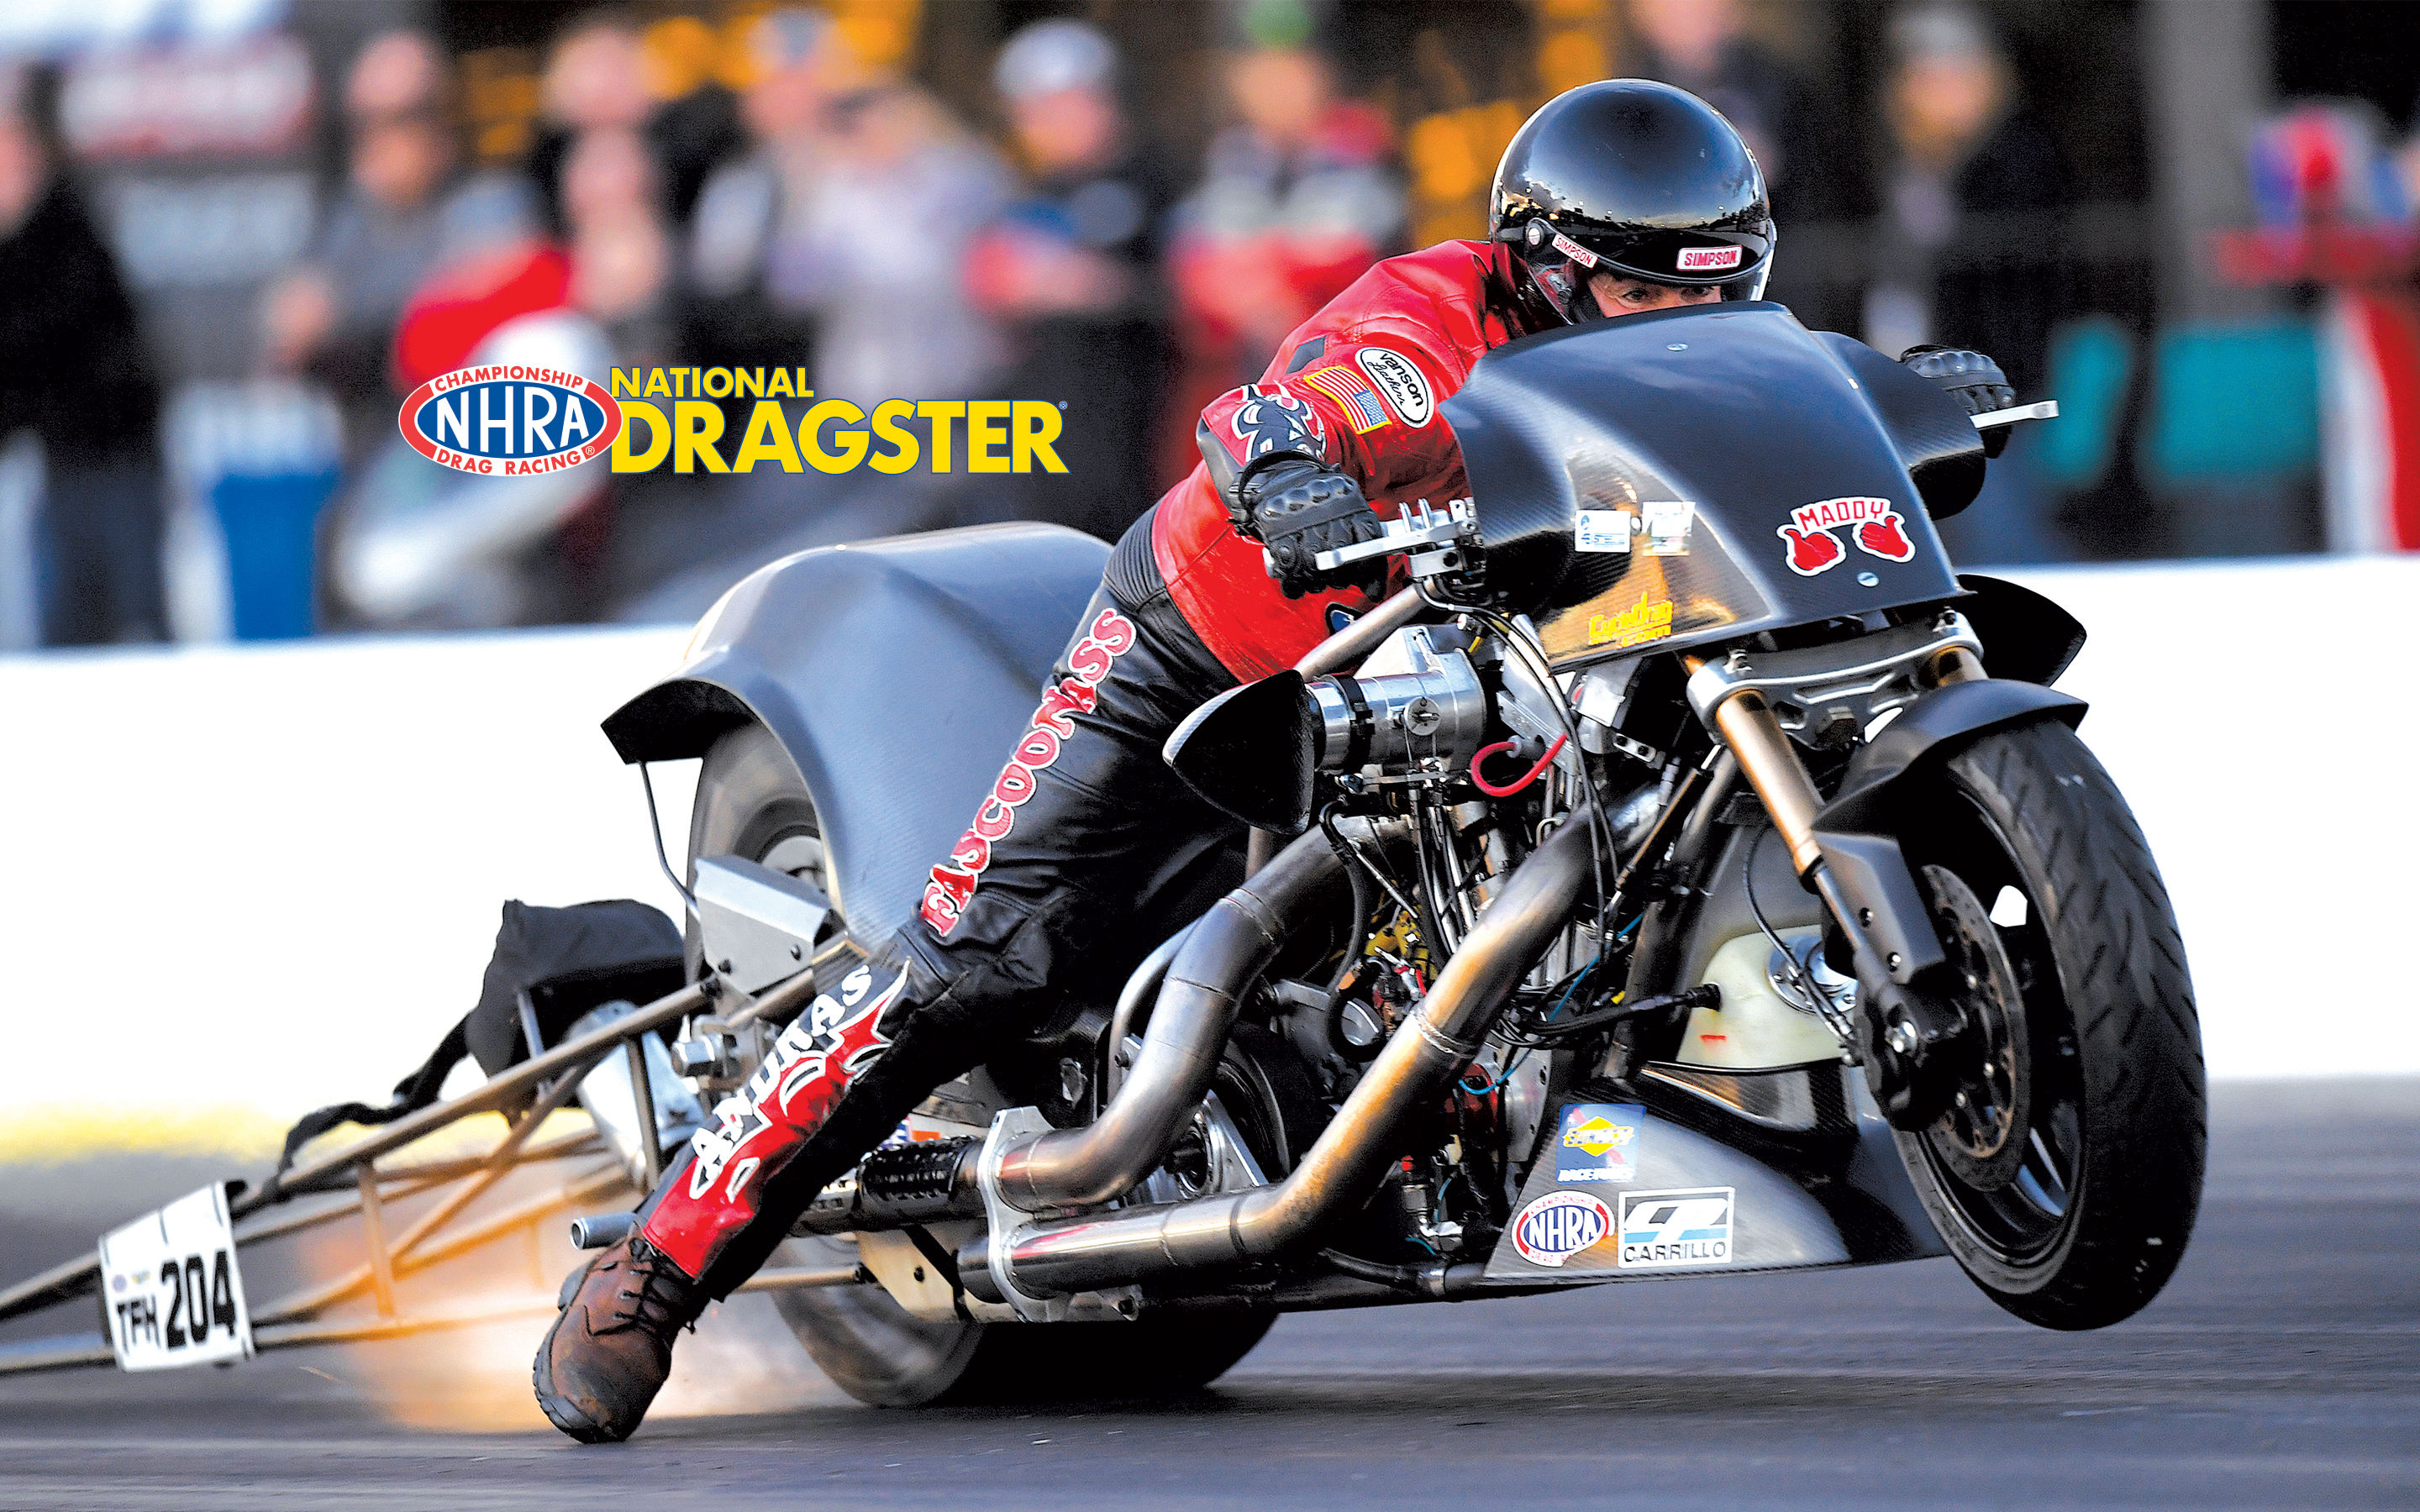 2880x1800 NHRA National Dragster wallpaper images (Issue 08, 2020) | NHRA